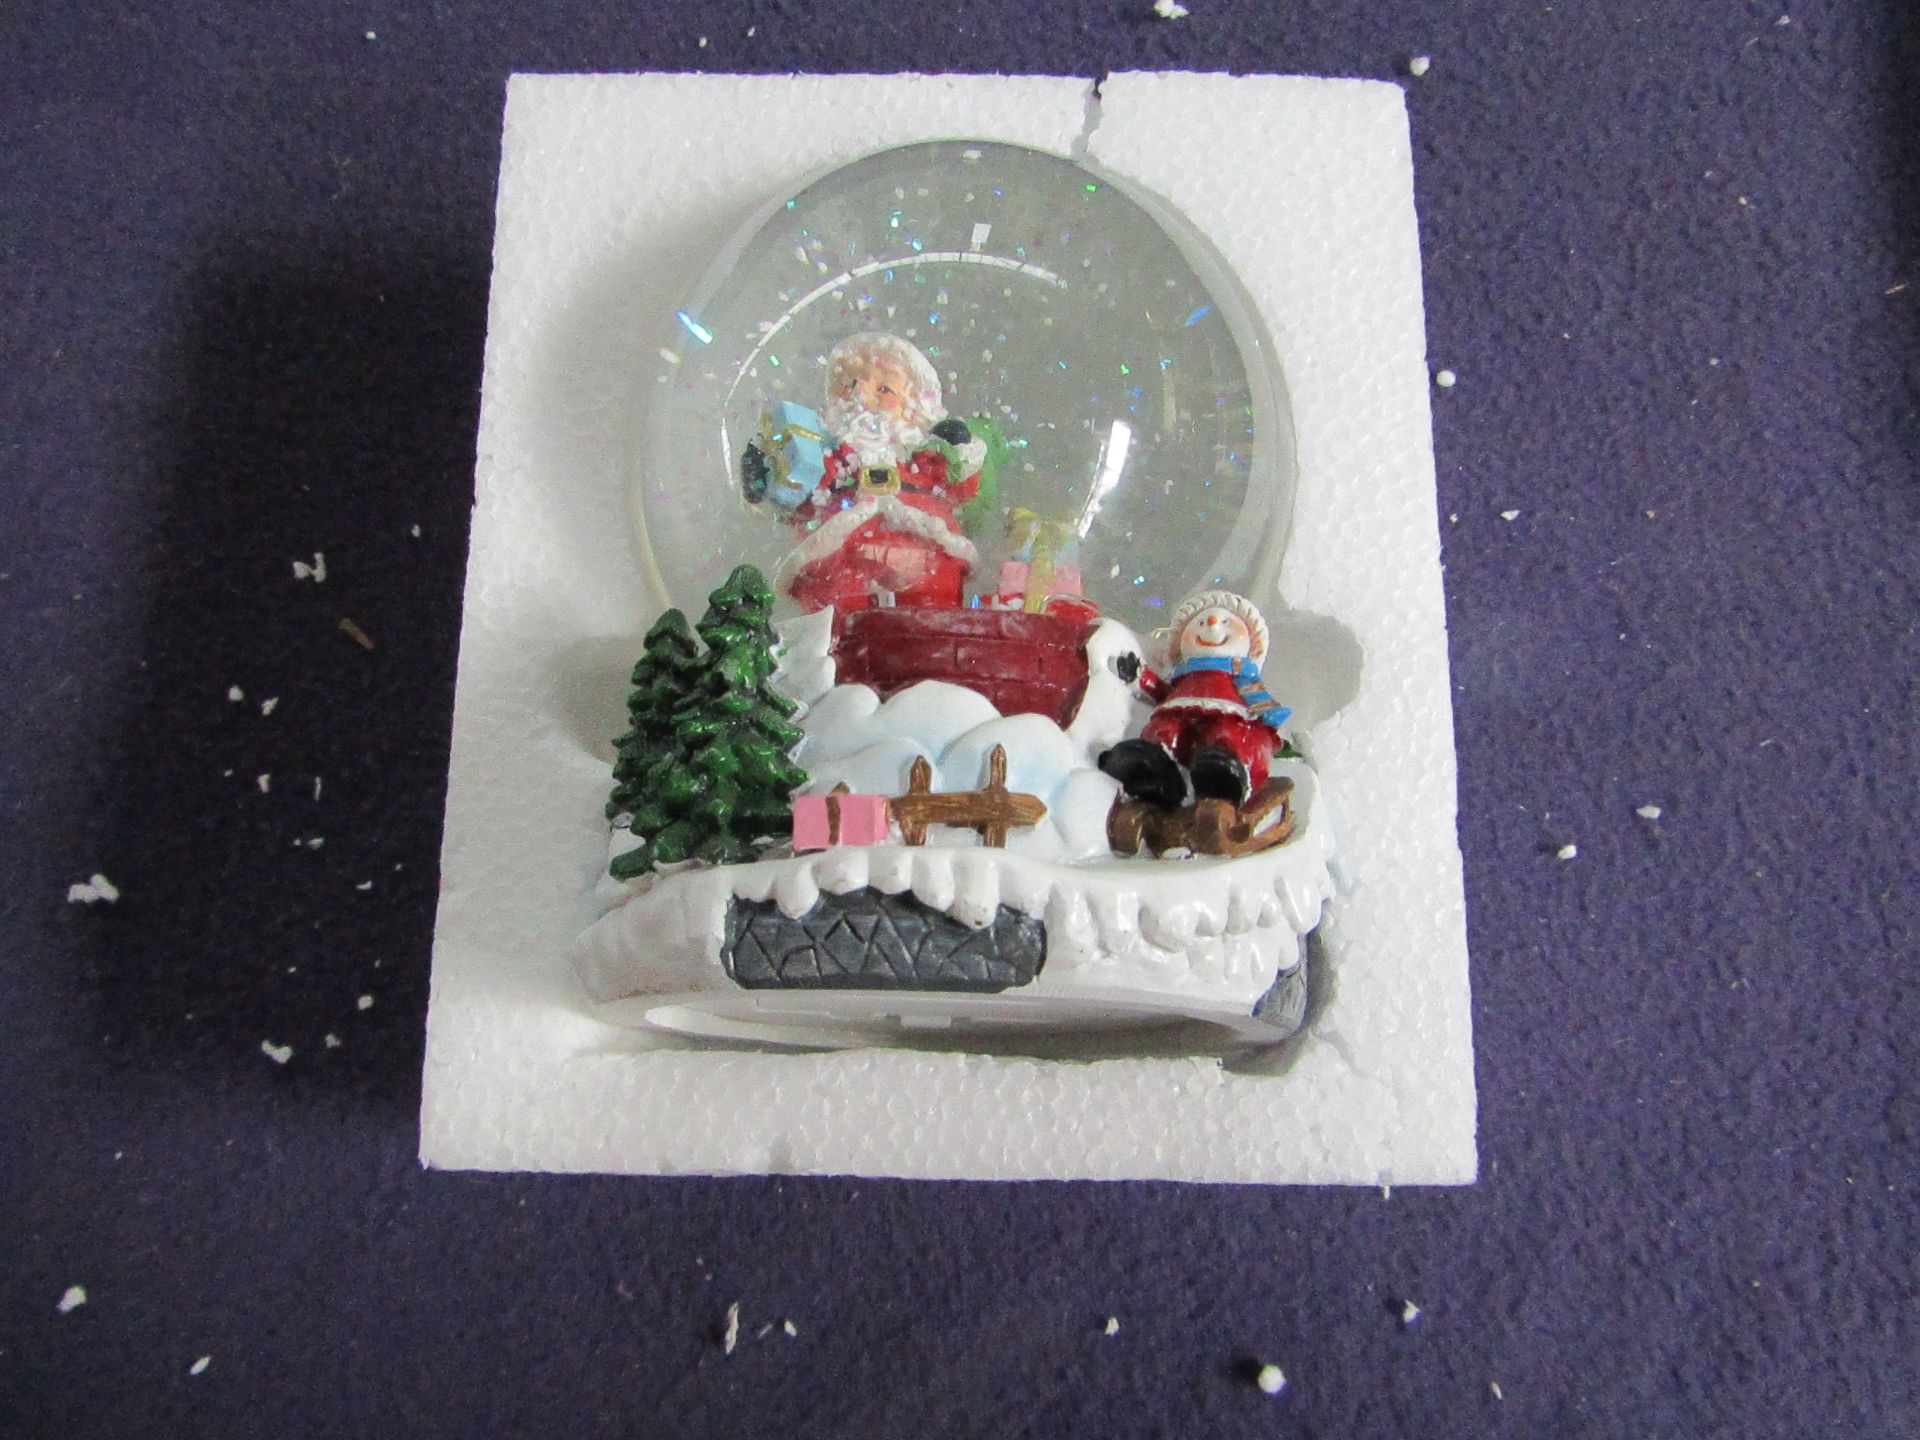 Celebright - LED Christmas Musical Snowglobe - Unchecked & Boxed.